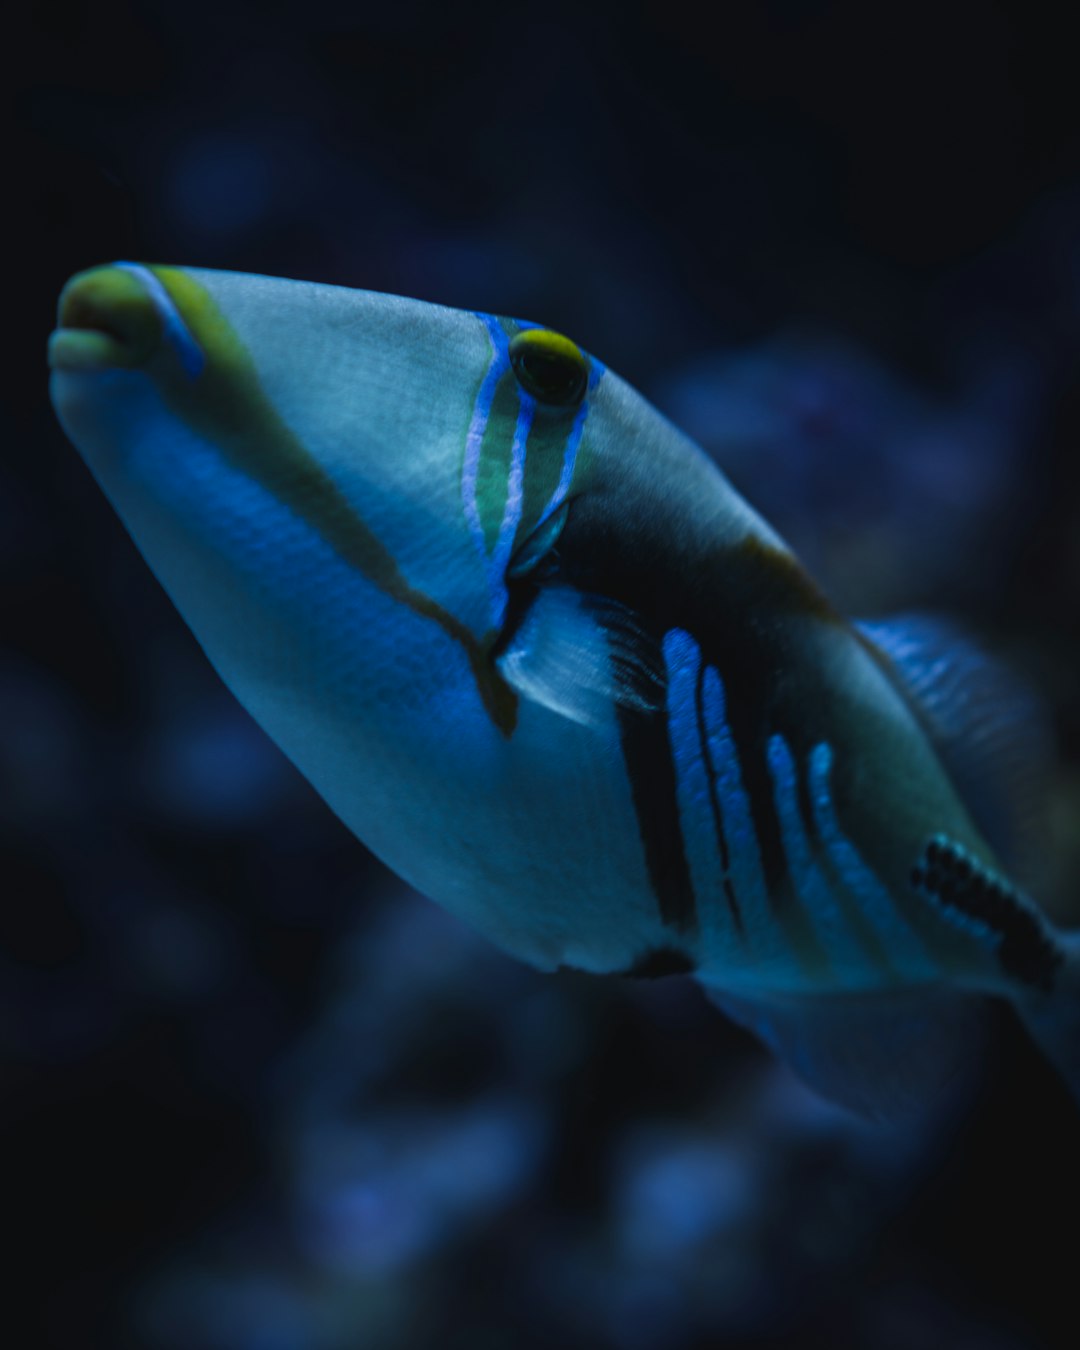 blue and white fish in close up photography